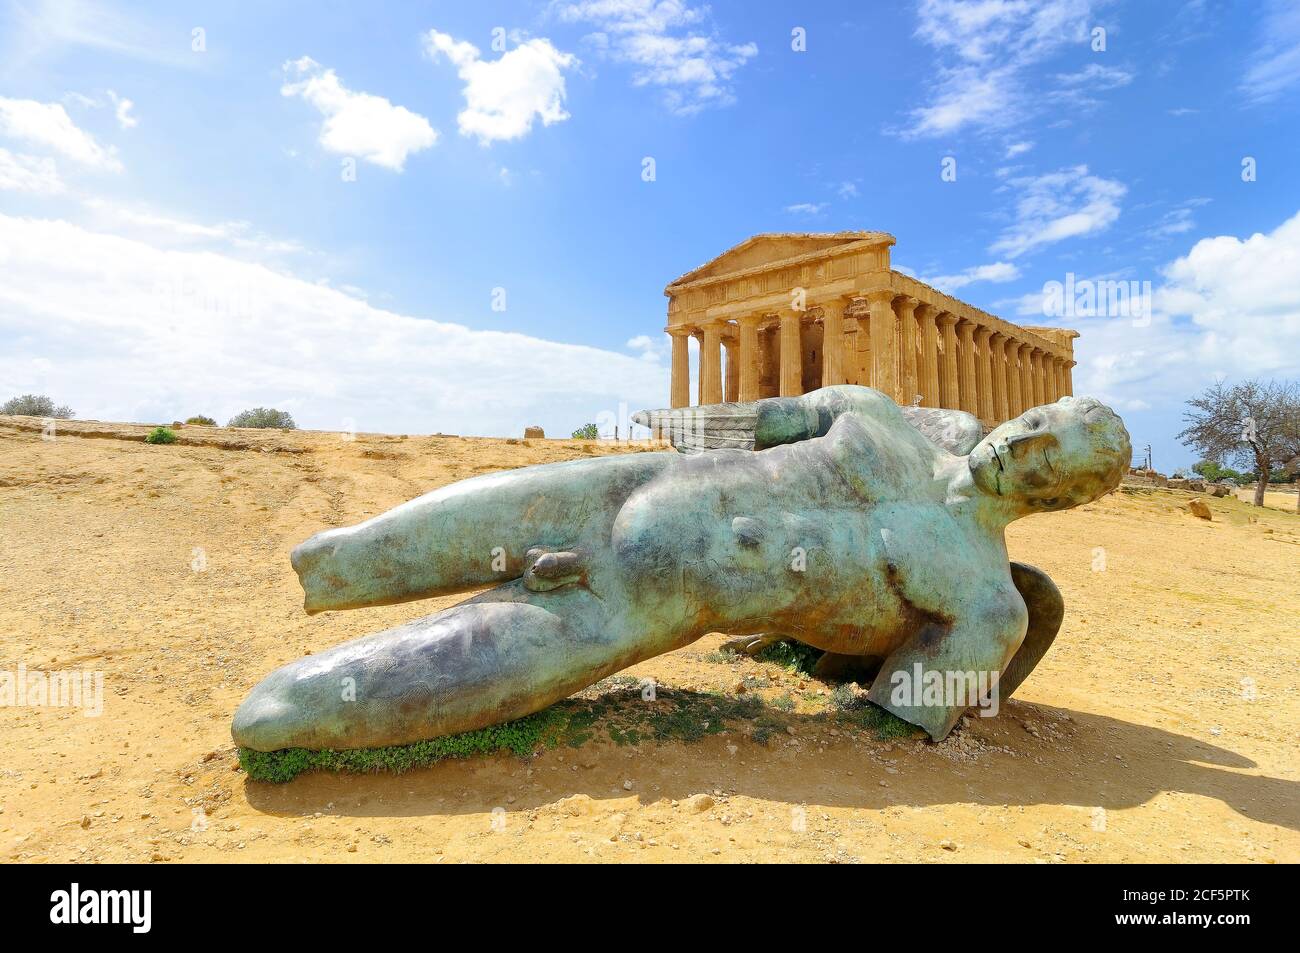 Agrigento is a city on the southern coast of Sicily, Italy. It was one of the leading cities of Magna Graecia during the golden age of Ancient Greece. Stock Photo